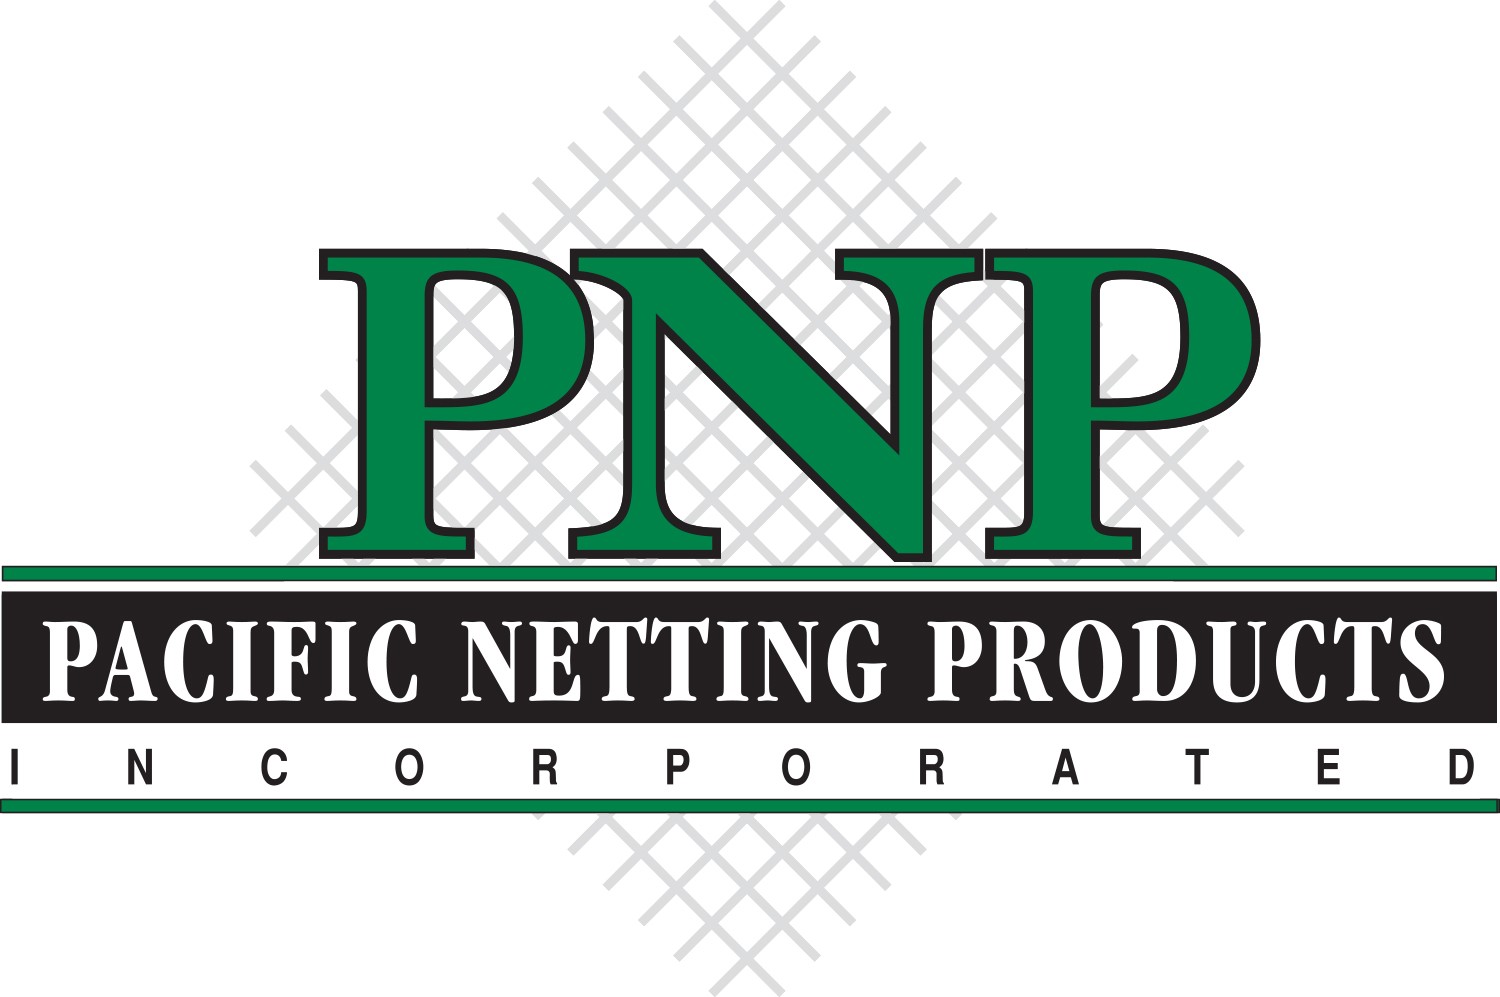 Pacific Netting Products